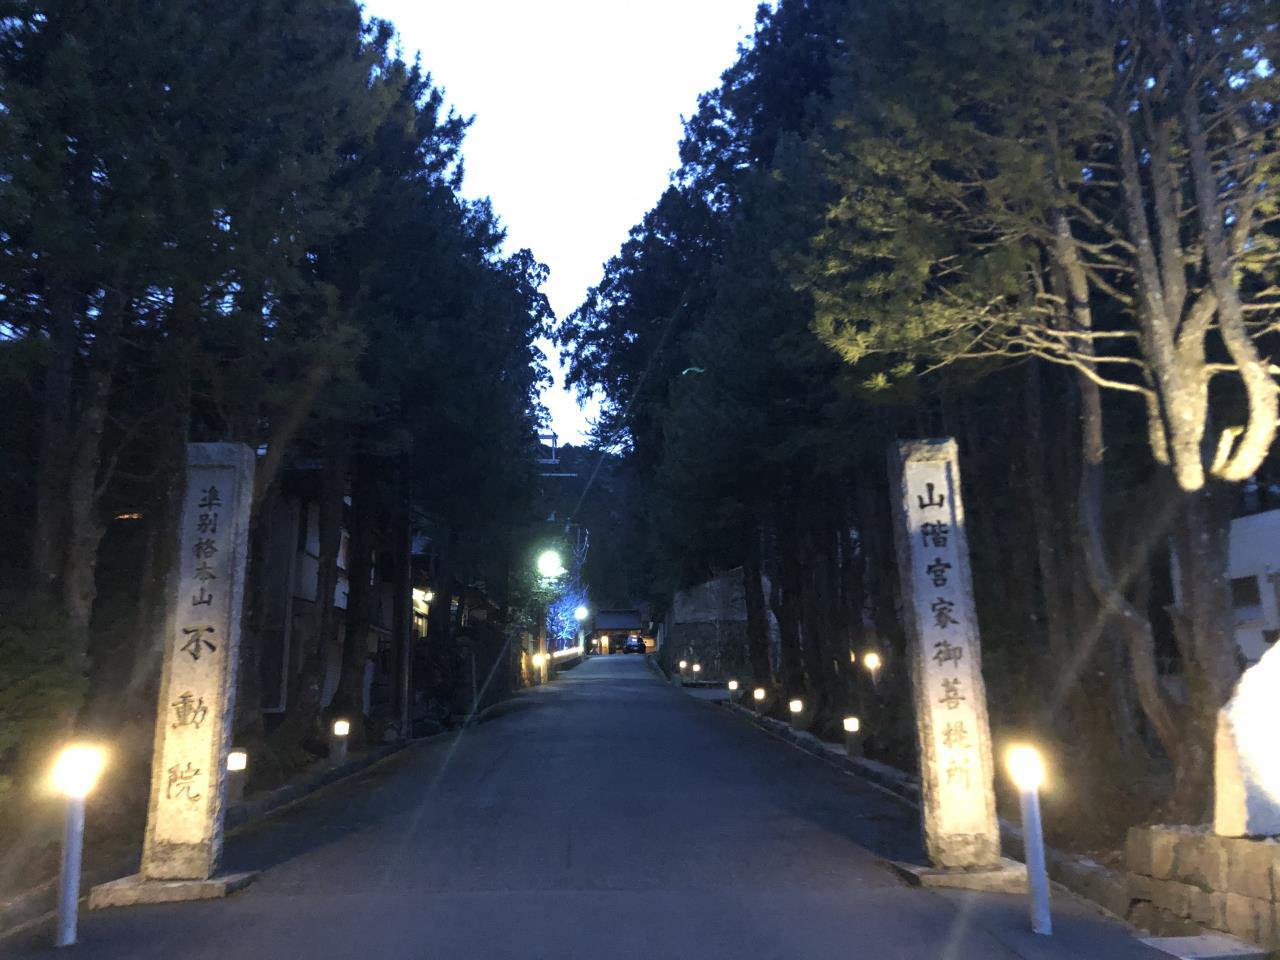 An Overnight Stay at a Buddhist Temple on the Sacred Mt. Koya